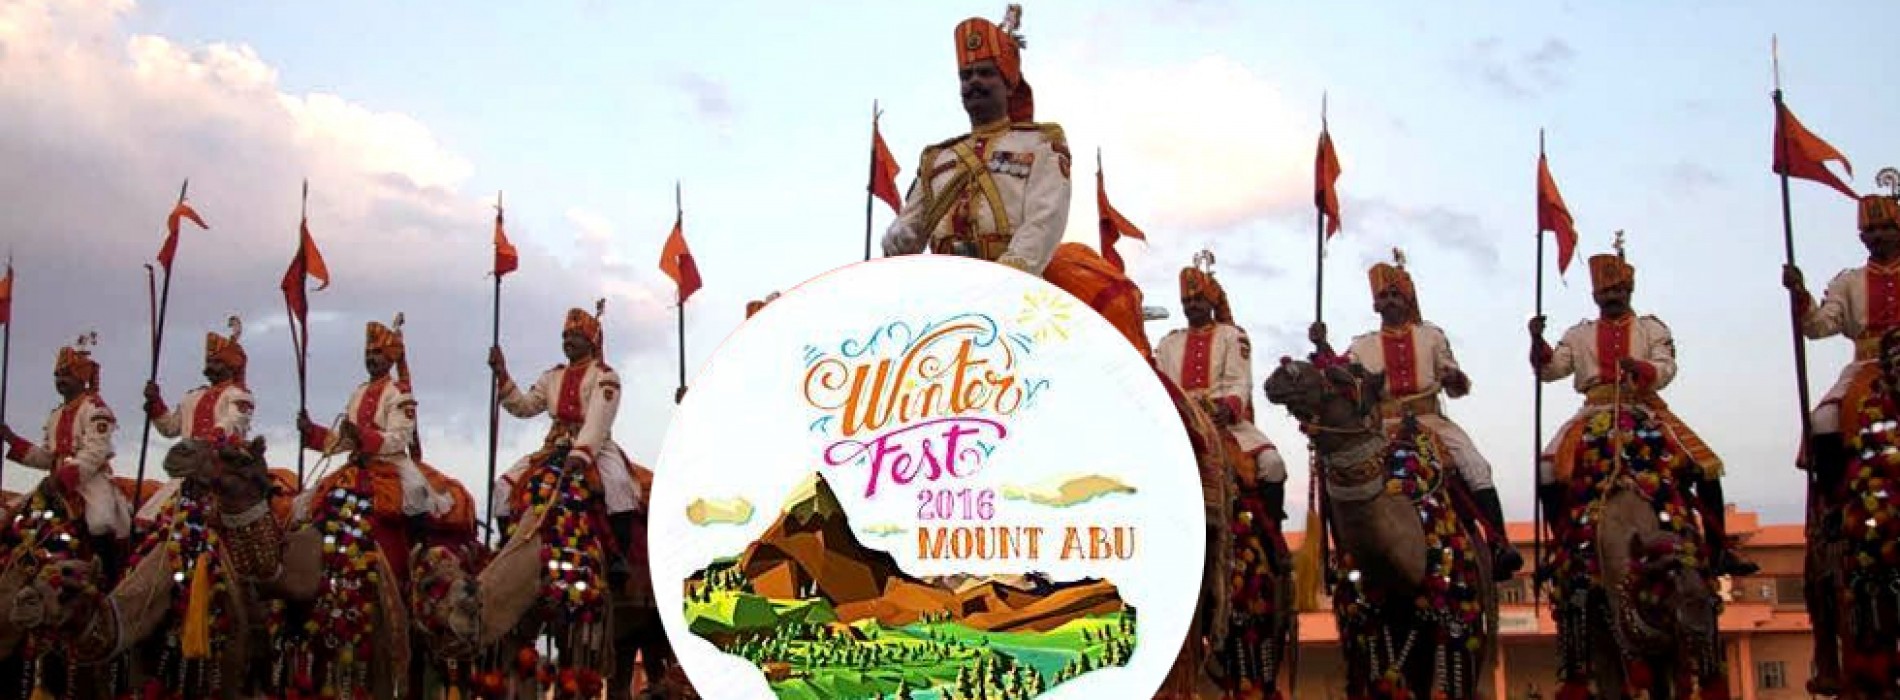 Winter Fest 2016 begins in Mount Abu from today